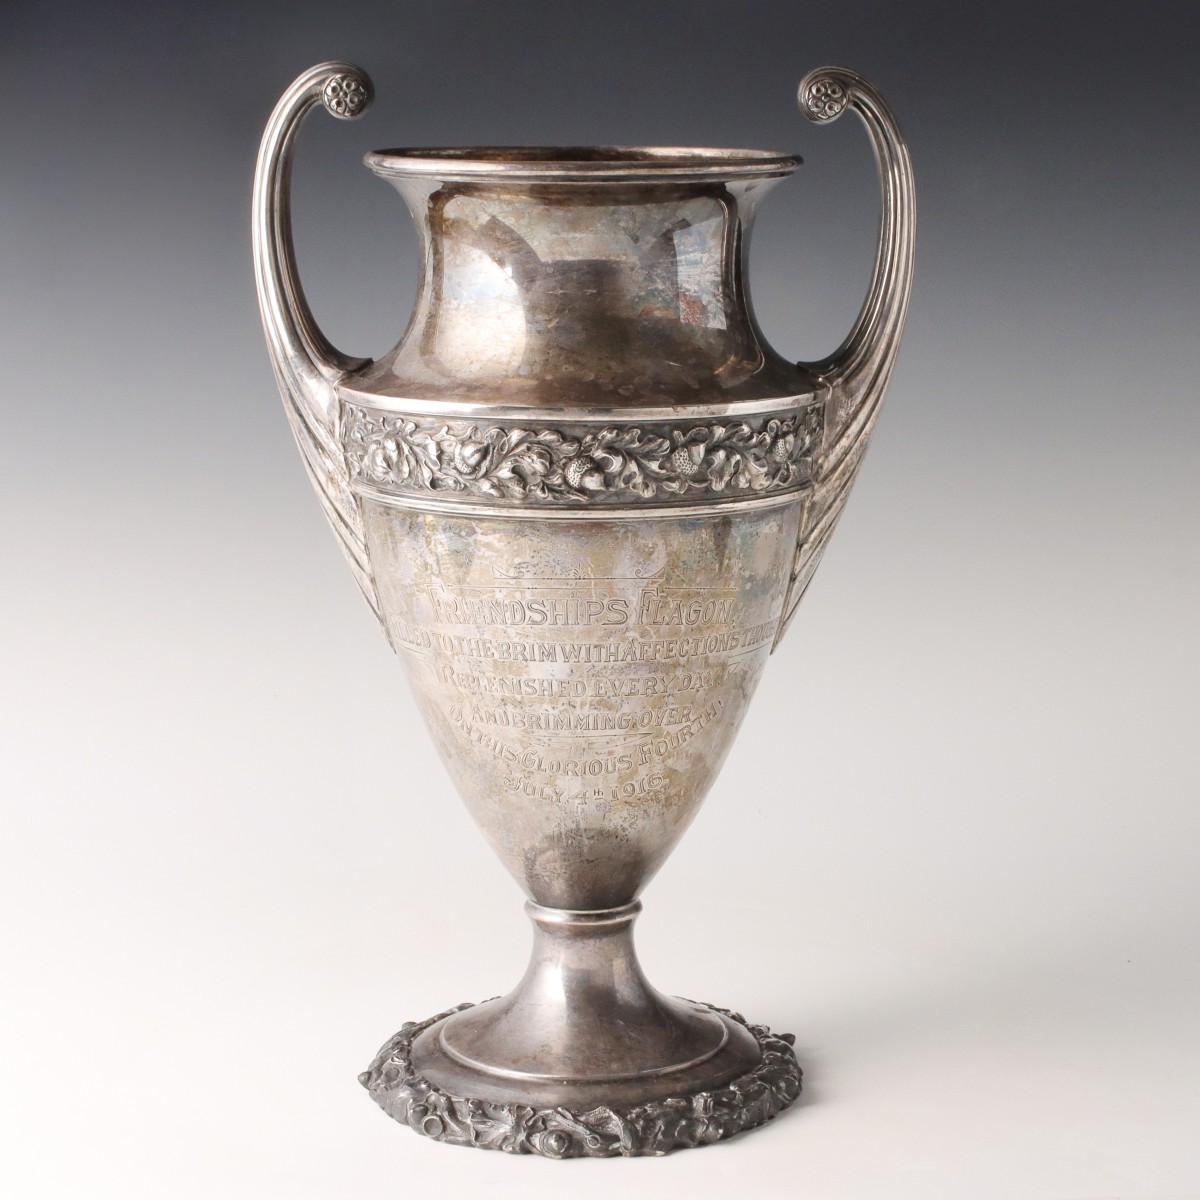 A LARGE SILVER PRESENTATION LOVING CUP, JULY 4, 1916